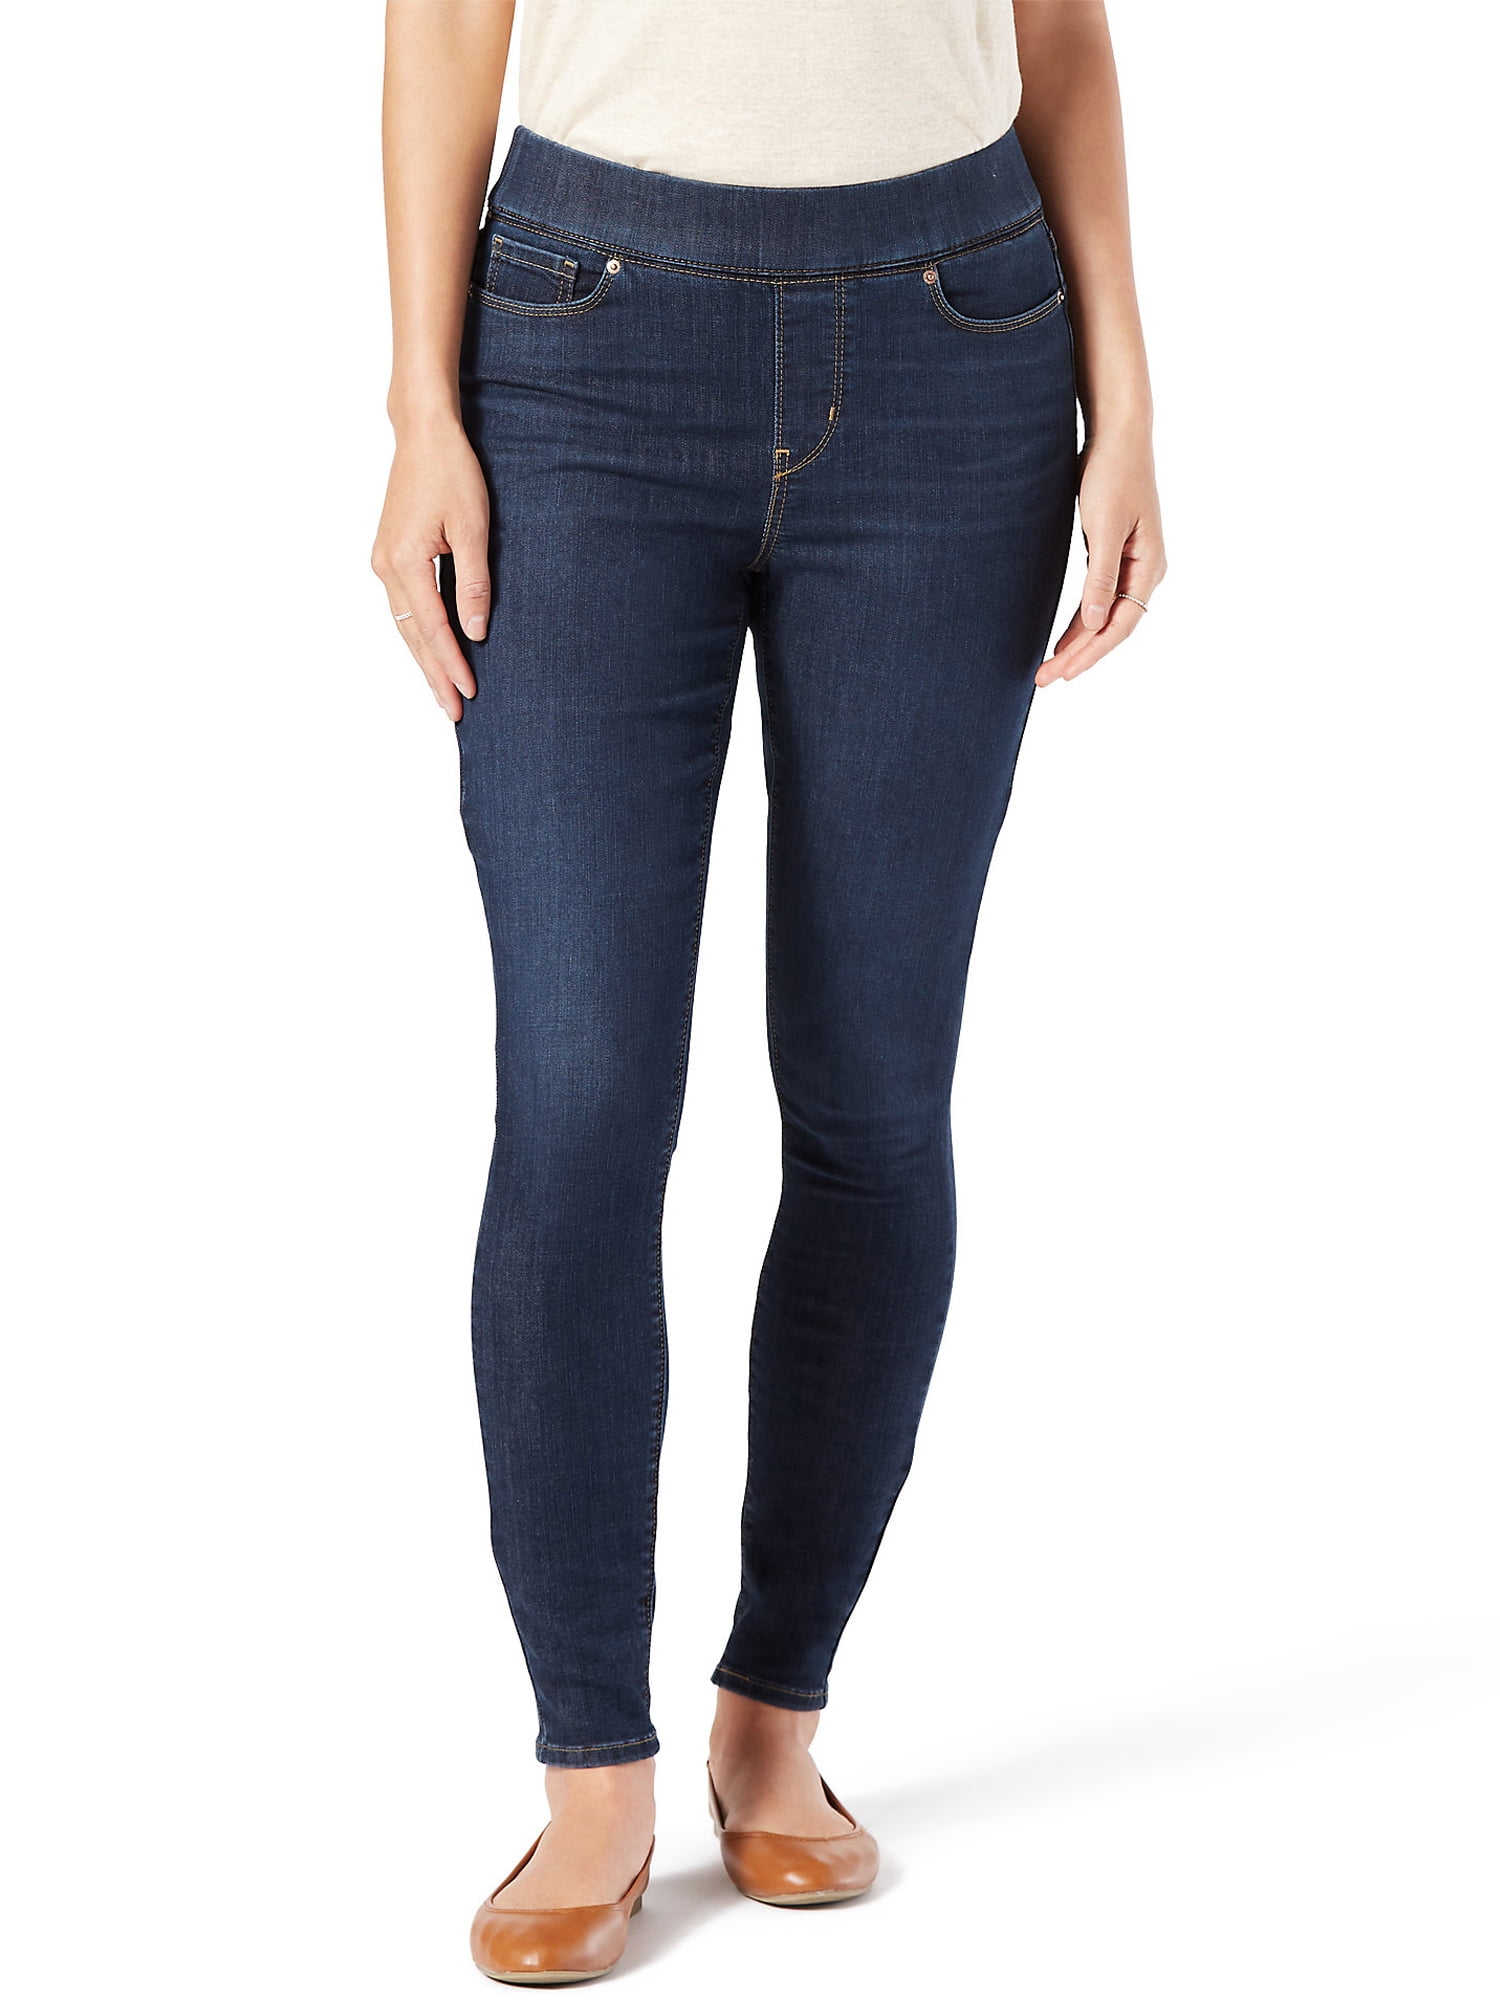 Appal Bisschop Beer Signature by Levi Strauss & Co. Women's Simply Stretch Shaping Pull-On  Super Skinny Jeans - Walmart.com